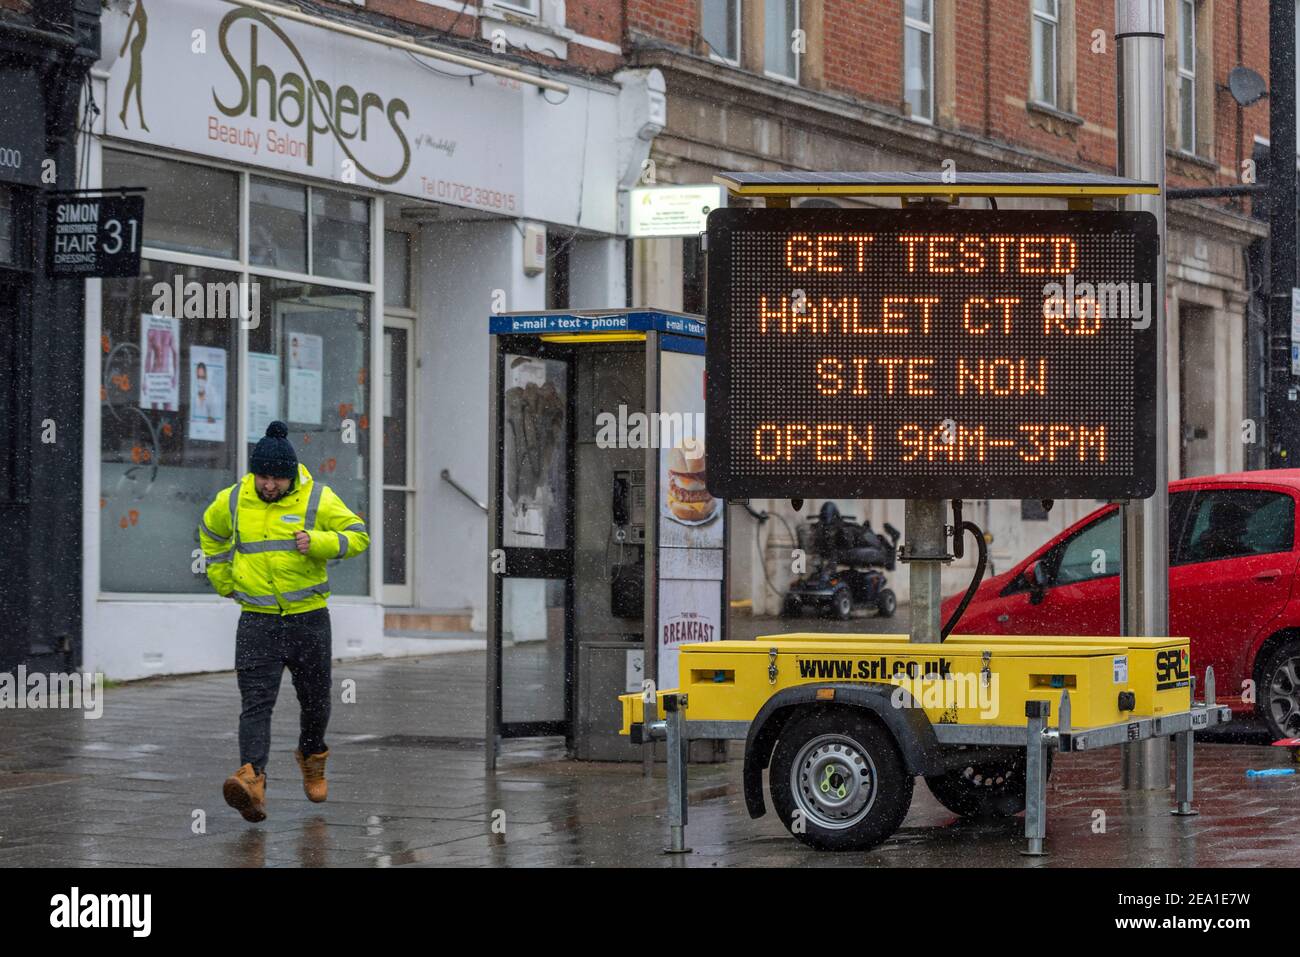 Westcliff on Sea, Essex, UK. 7th Feb, 2021. Storm Darcy reached the area later than initially forecast, with the area remaining wet overnight. Snow and sleety flurries arrived from around 7am. A male in construction site style clothing running towards railway station. COVID 19 lockdown warnings remain in place. Matrix sign asking people to get tested in local test site at Hamlet Court Road Stock Photo